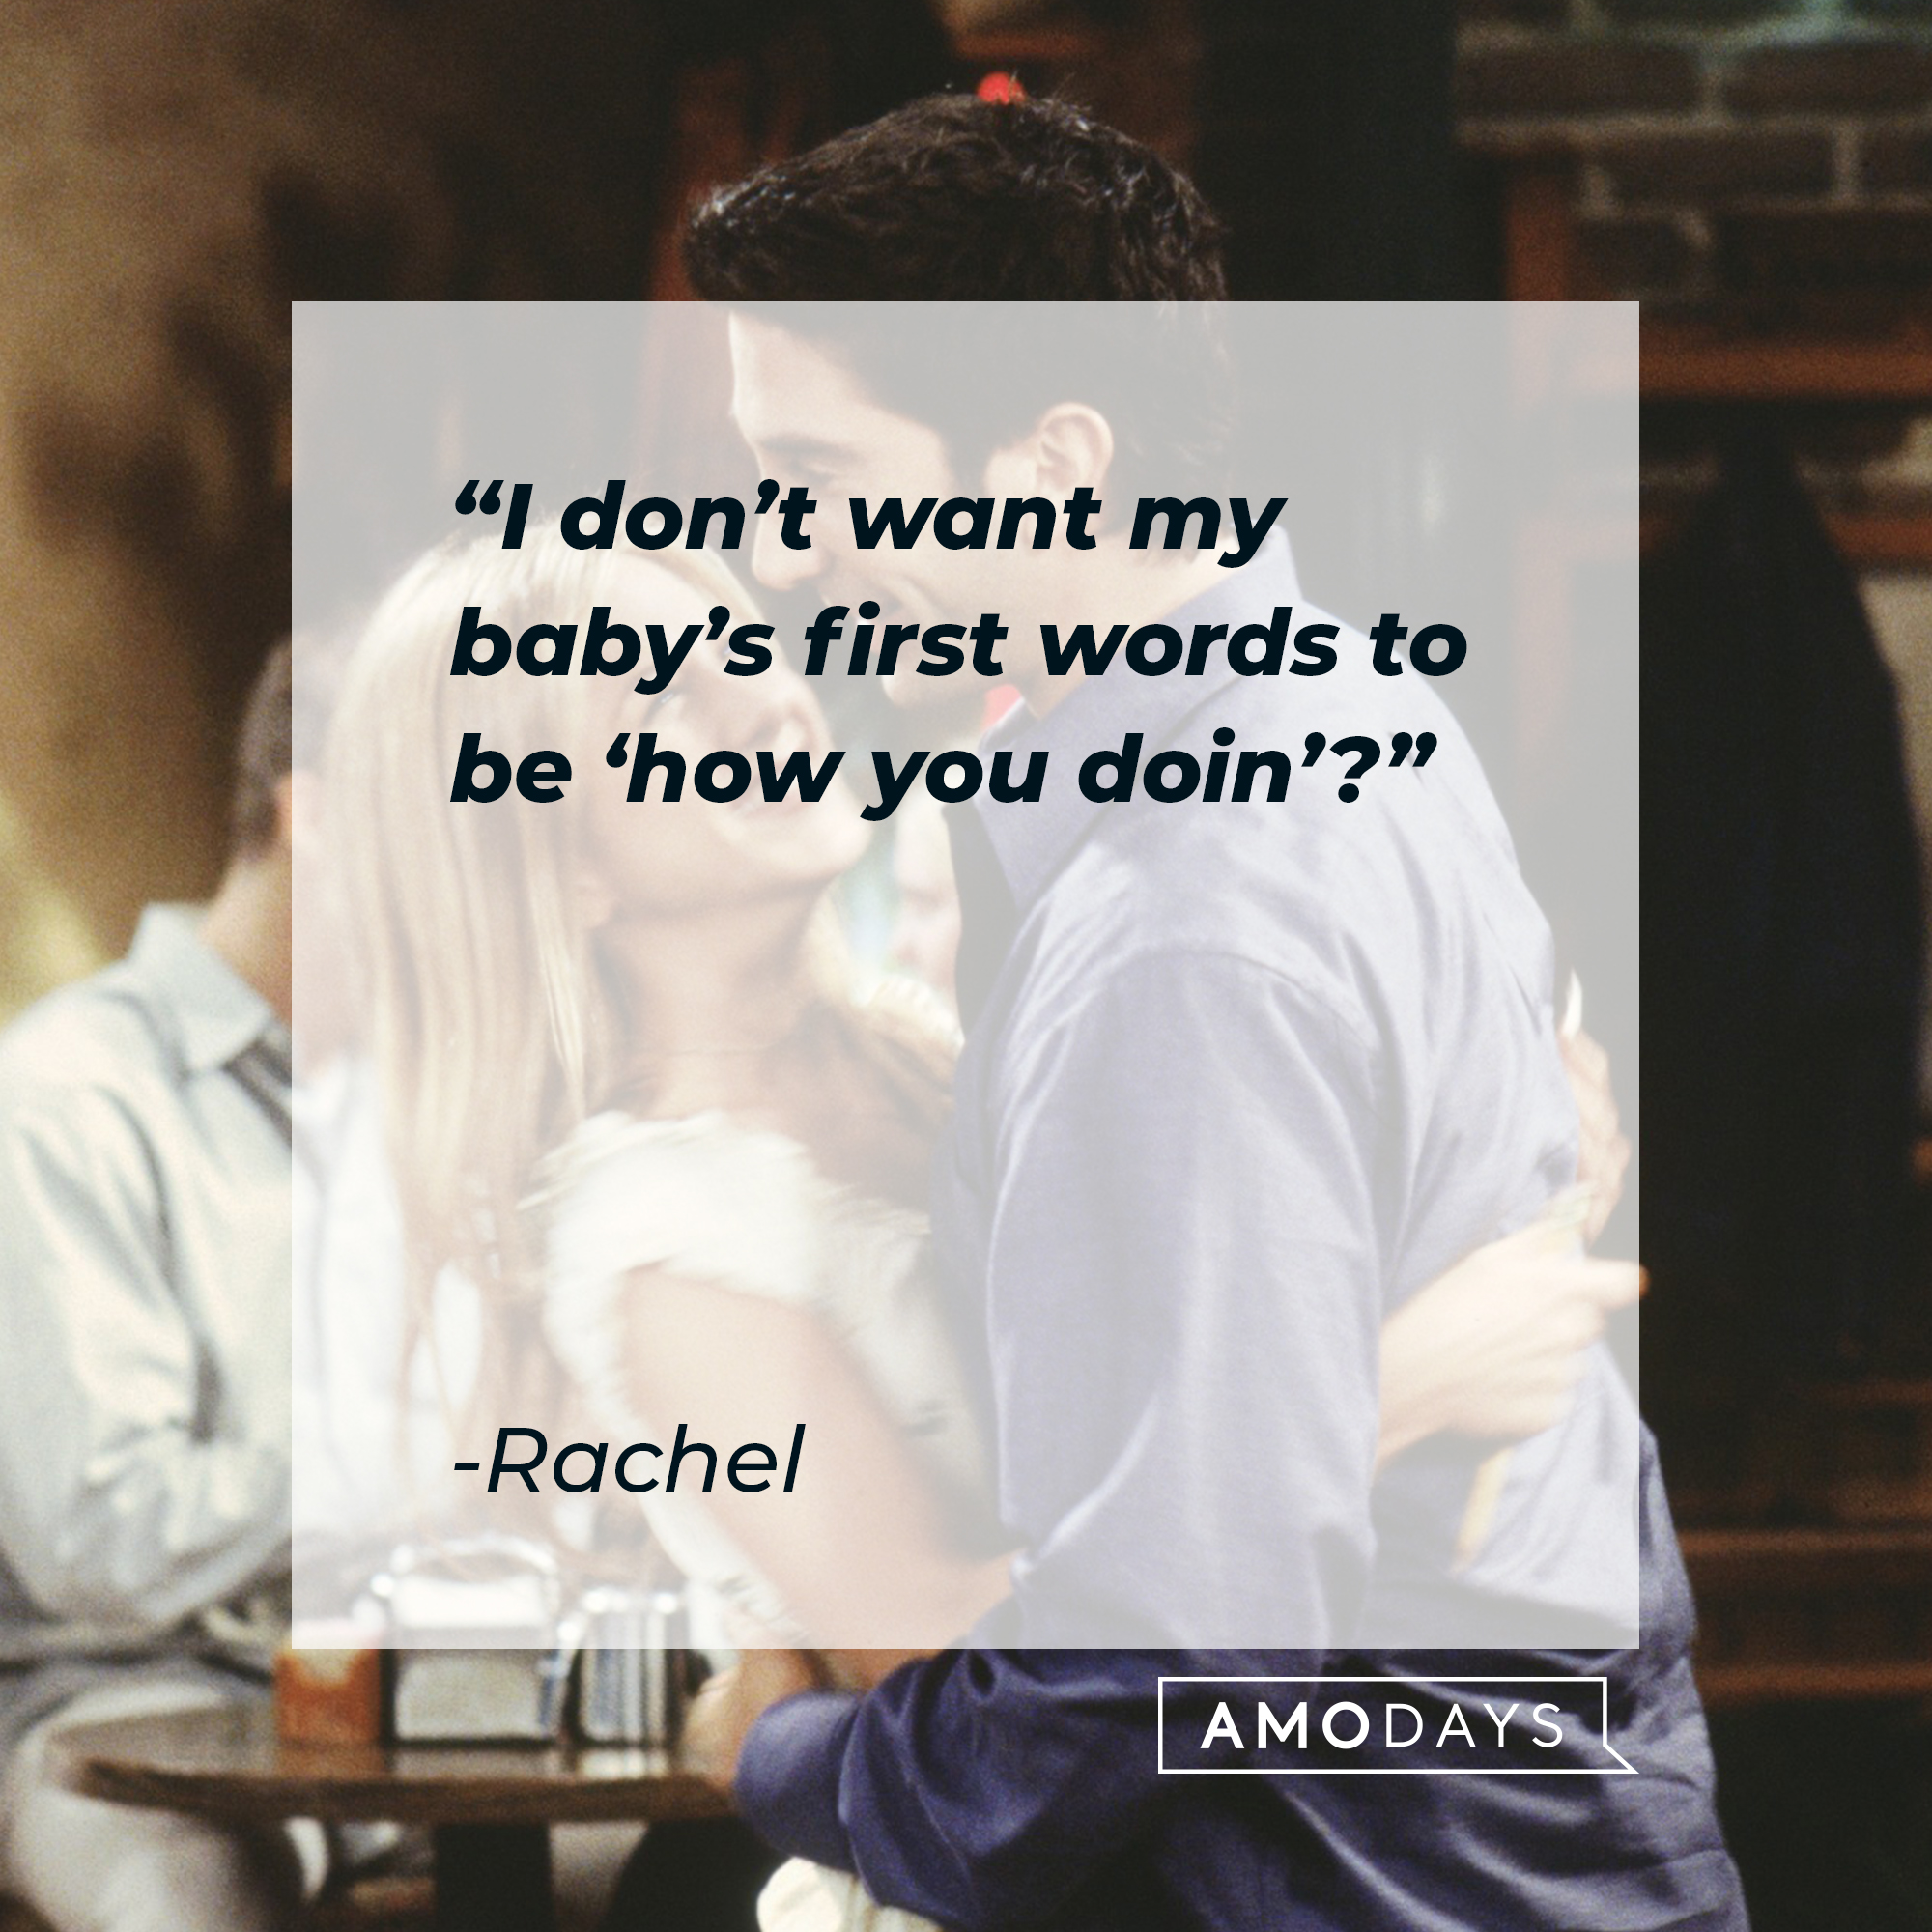 Rachel's quote: “I don’t want my baby’s first words to be ‘how you doin’?” | Source: facebook.com/friends.tv